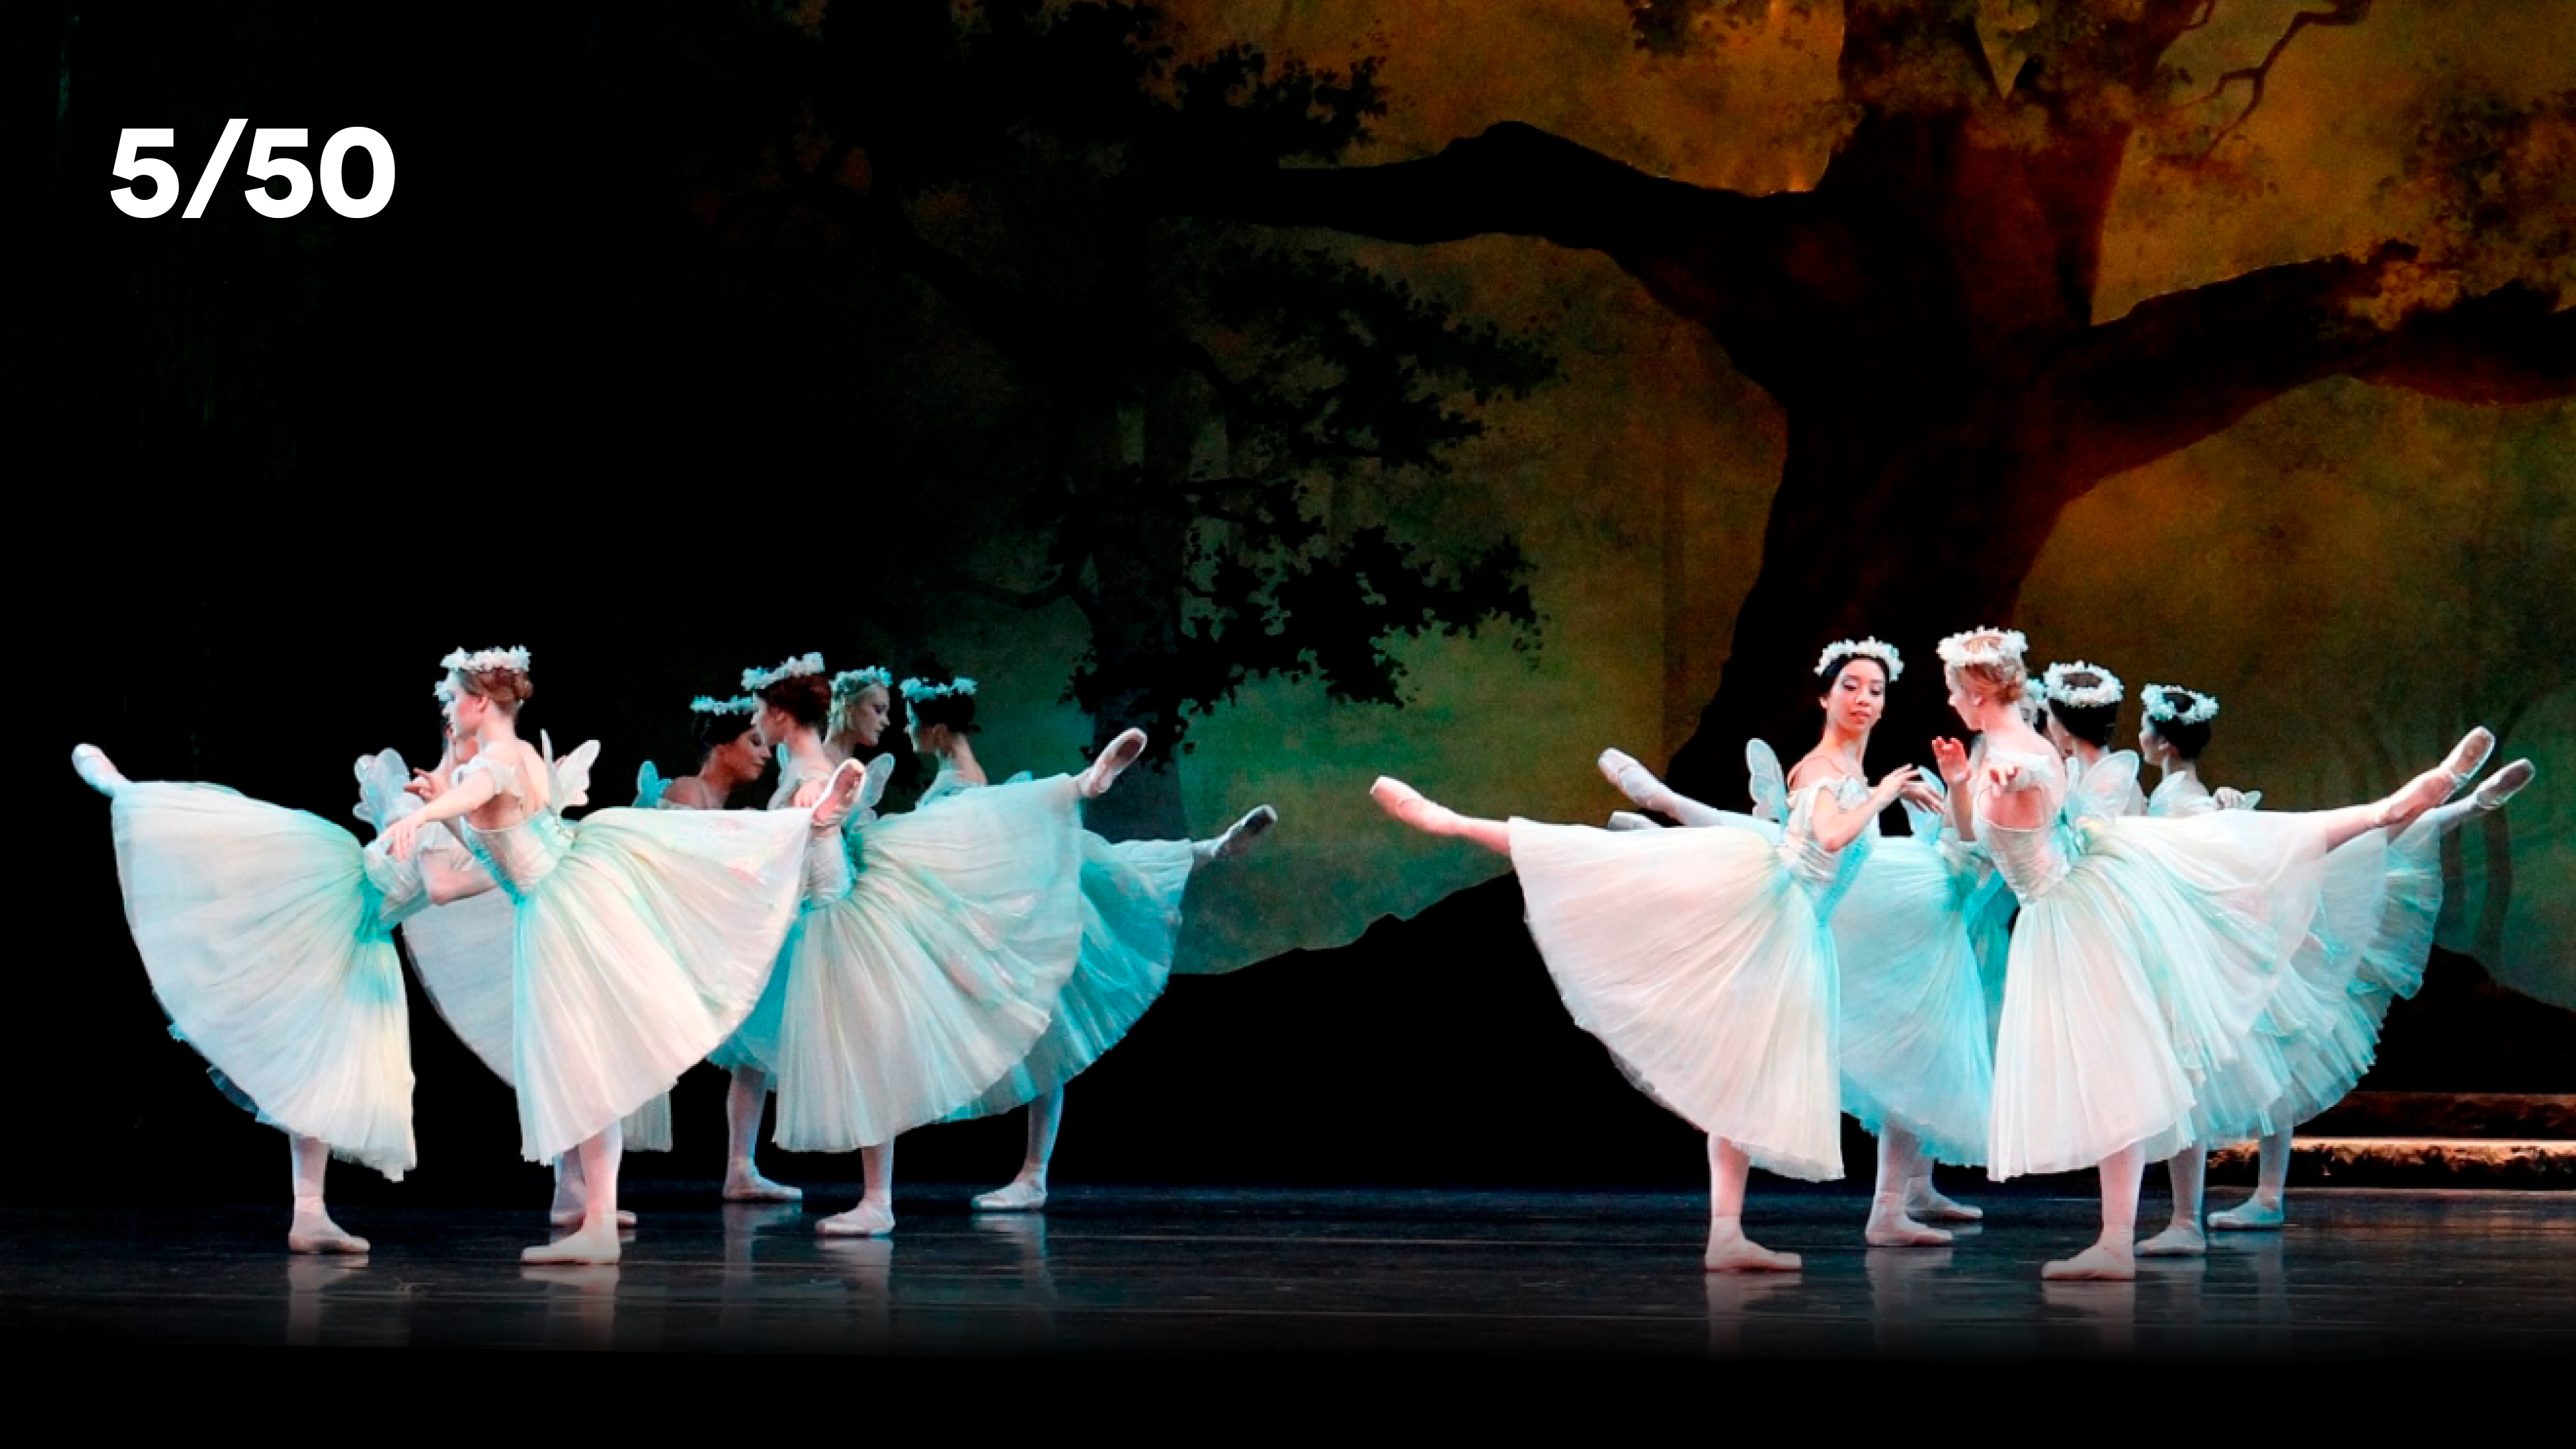 Two groups of six ballerinas on stage, in arabesque, wearing long white tutus and flower crowns.